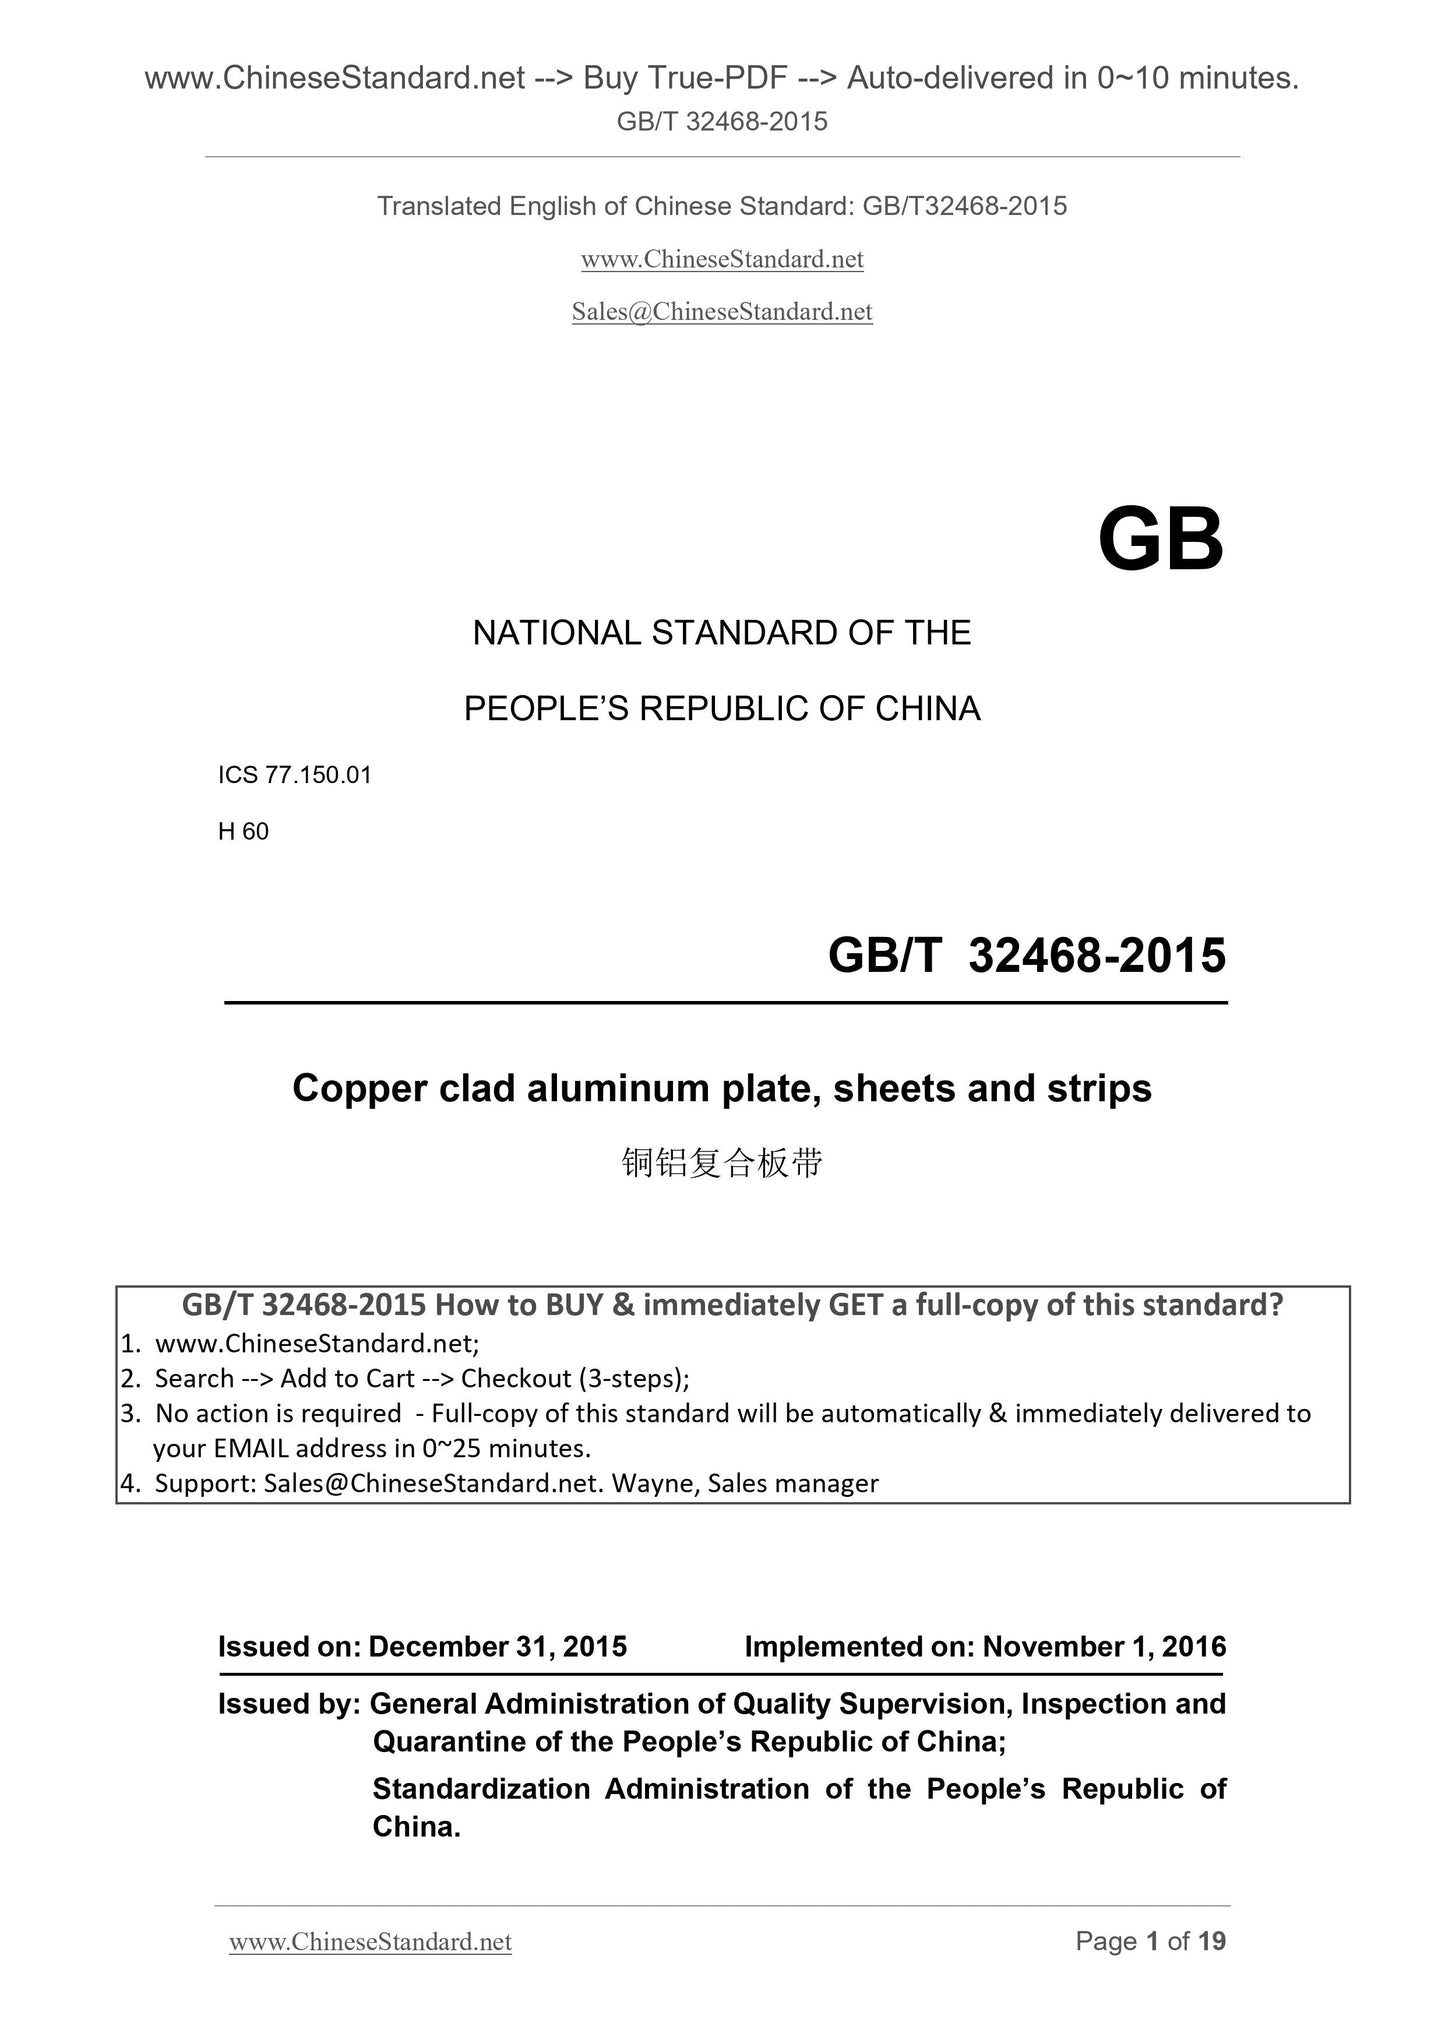 GB/T 32468-2015 Page 1